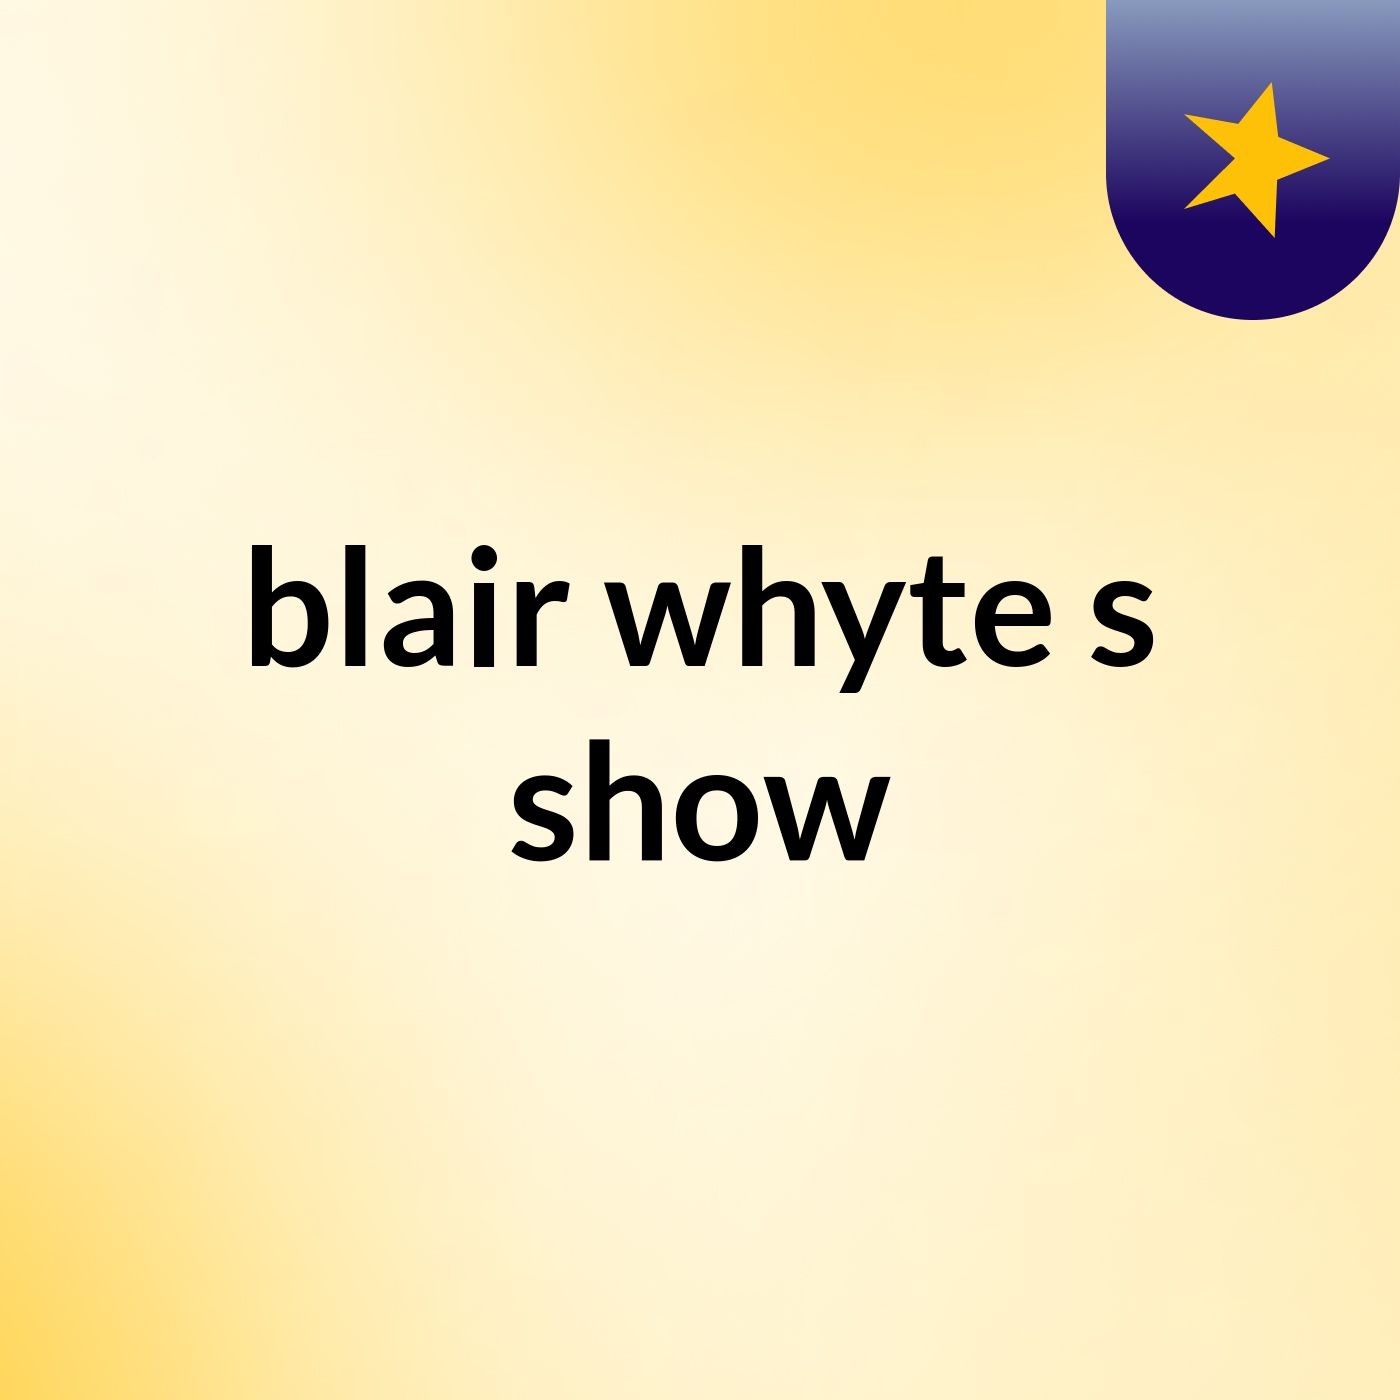 blair whyte's show